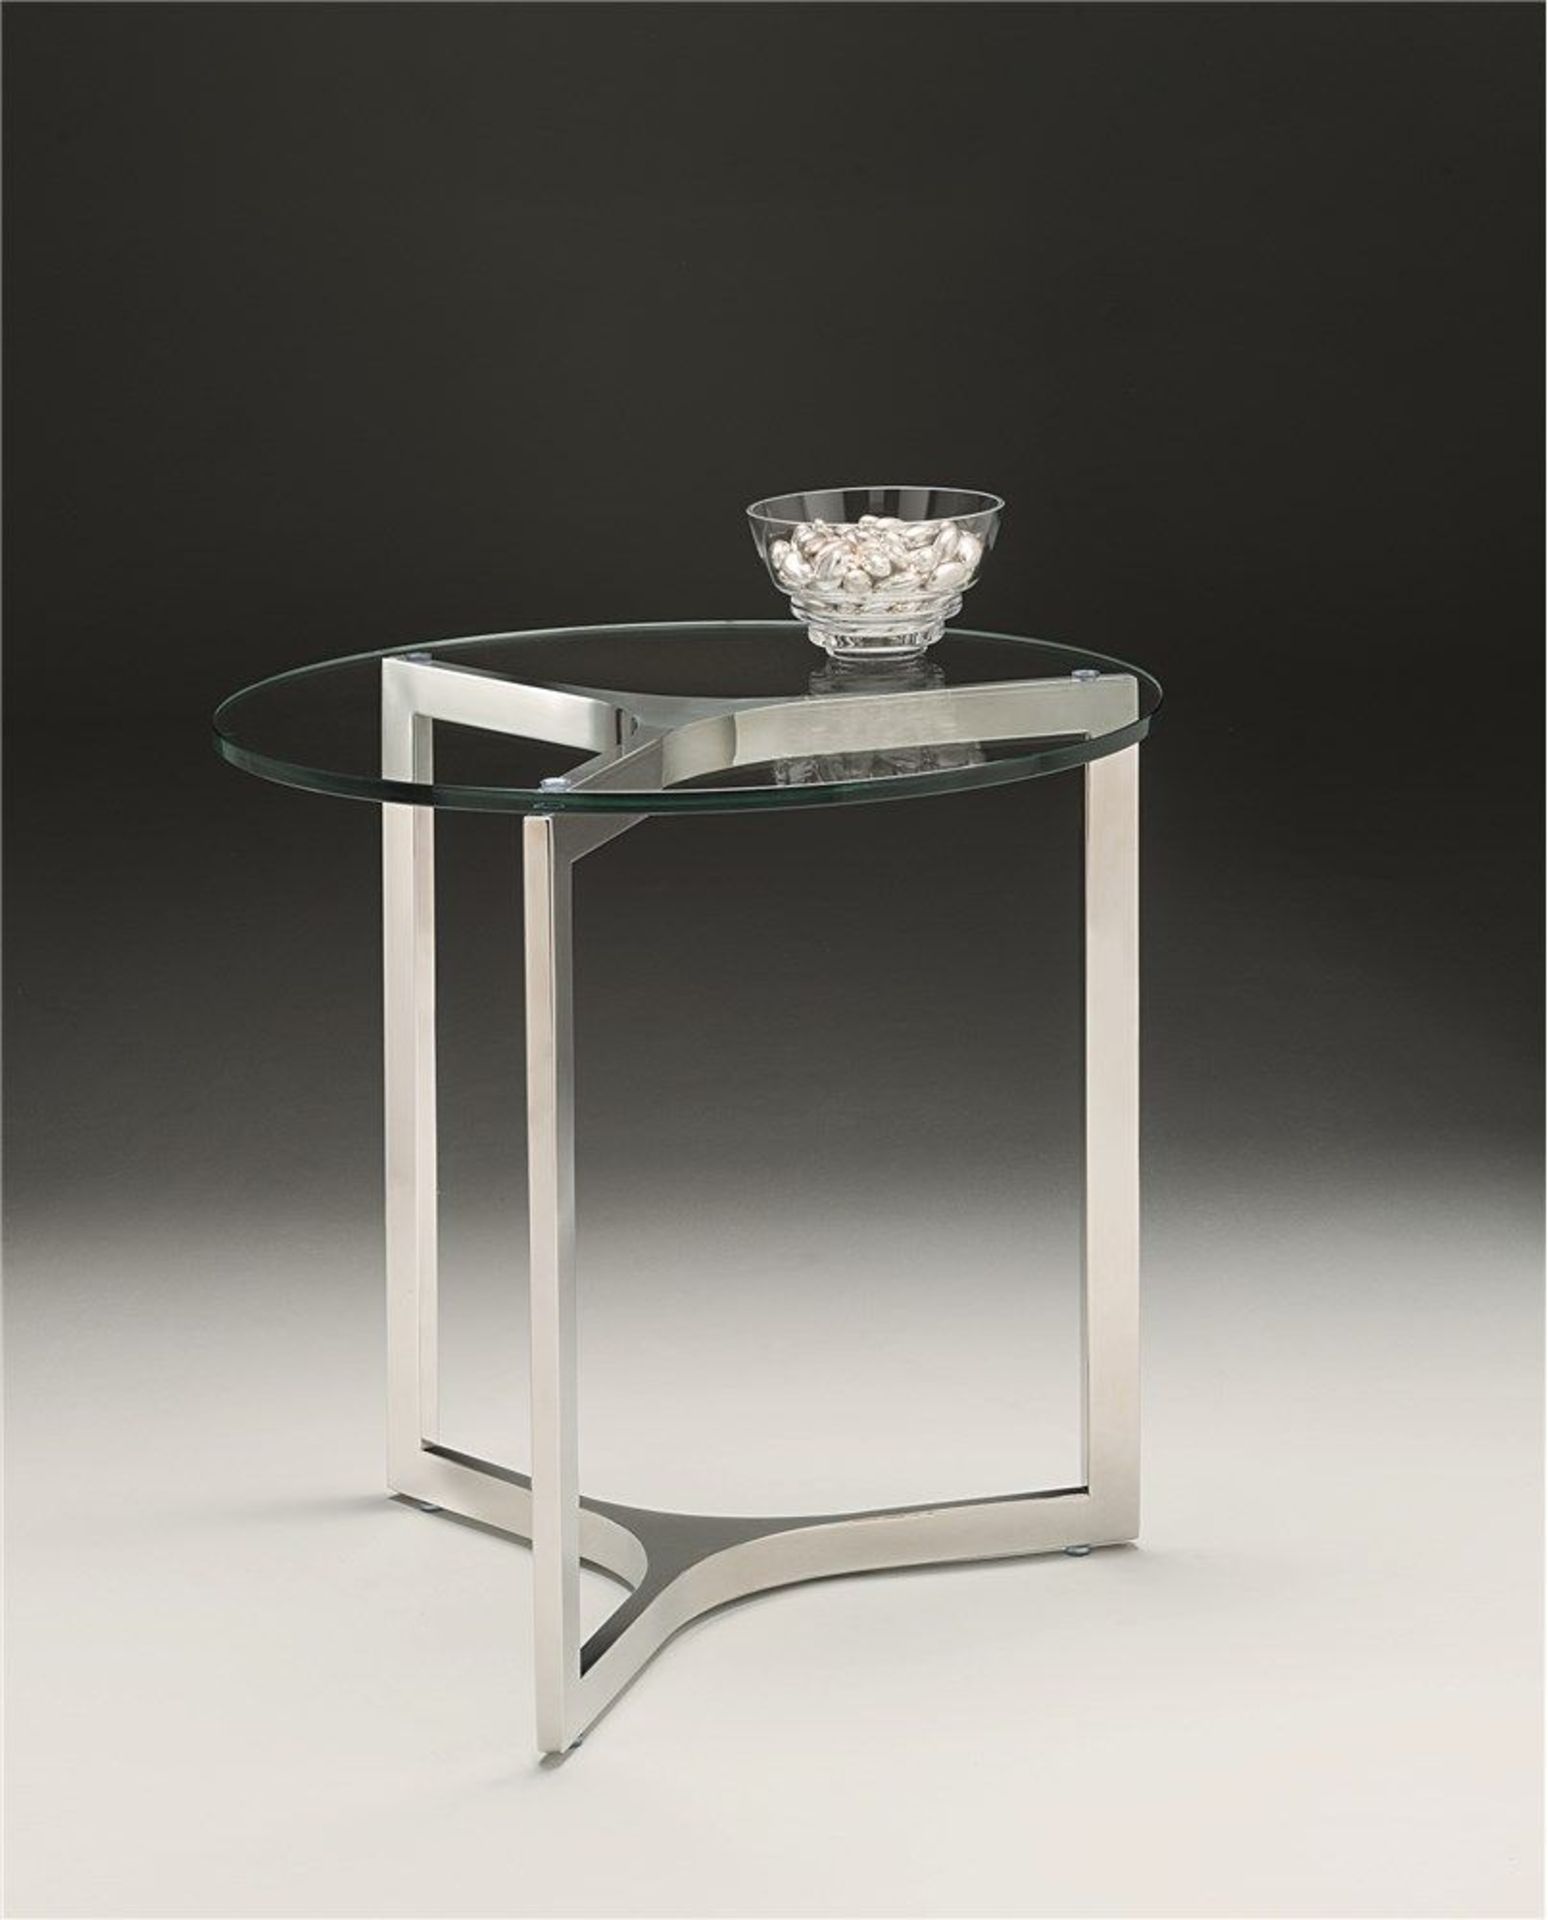 1 x Chelsom Revolve Lamp Table - CL081 - Laser Cut Polished Stainless Steel Base With Clear Tempered